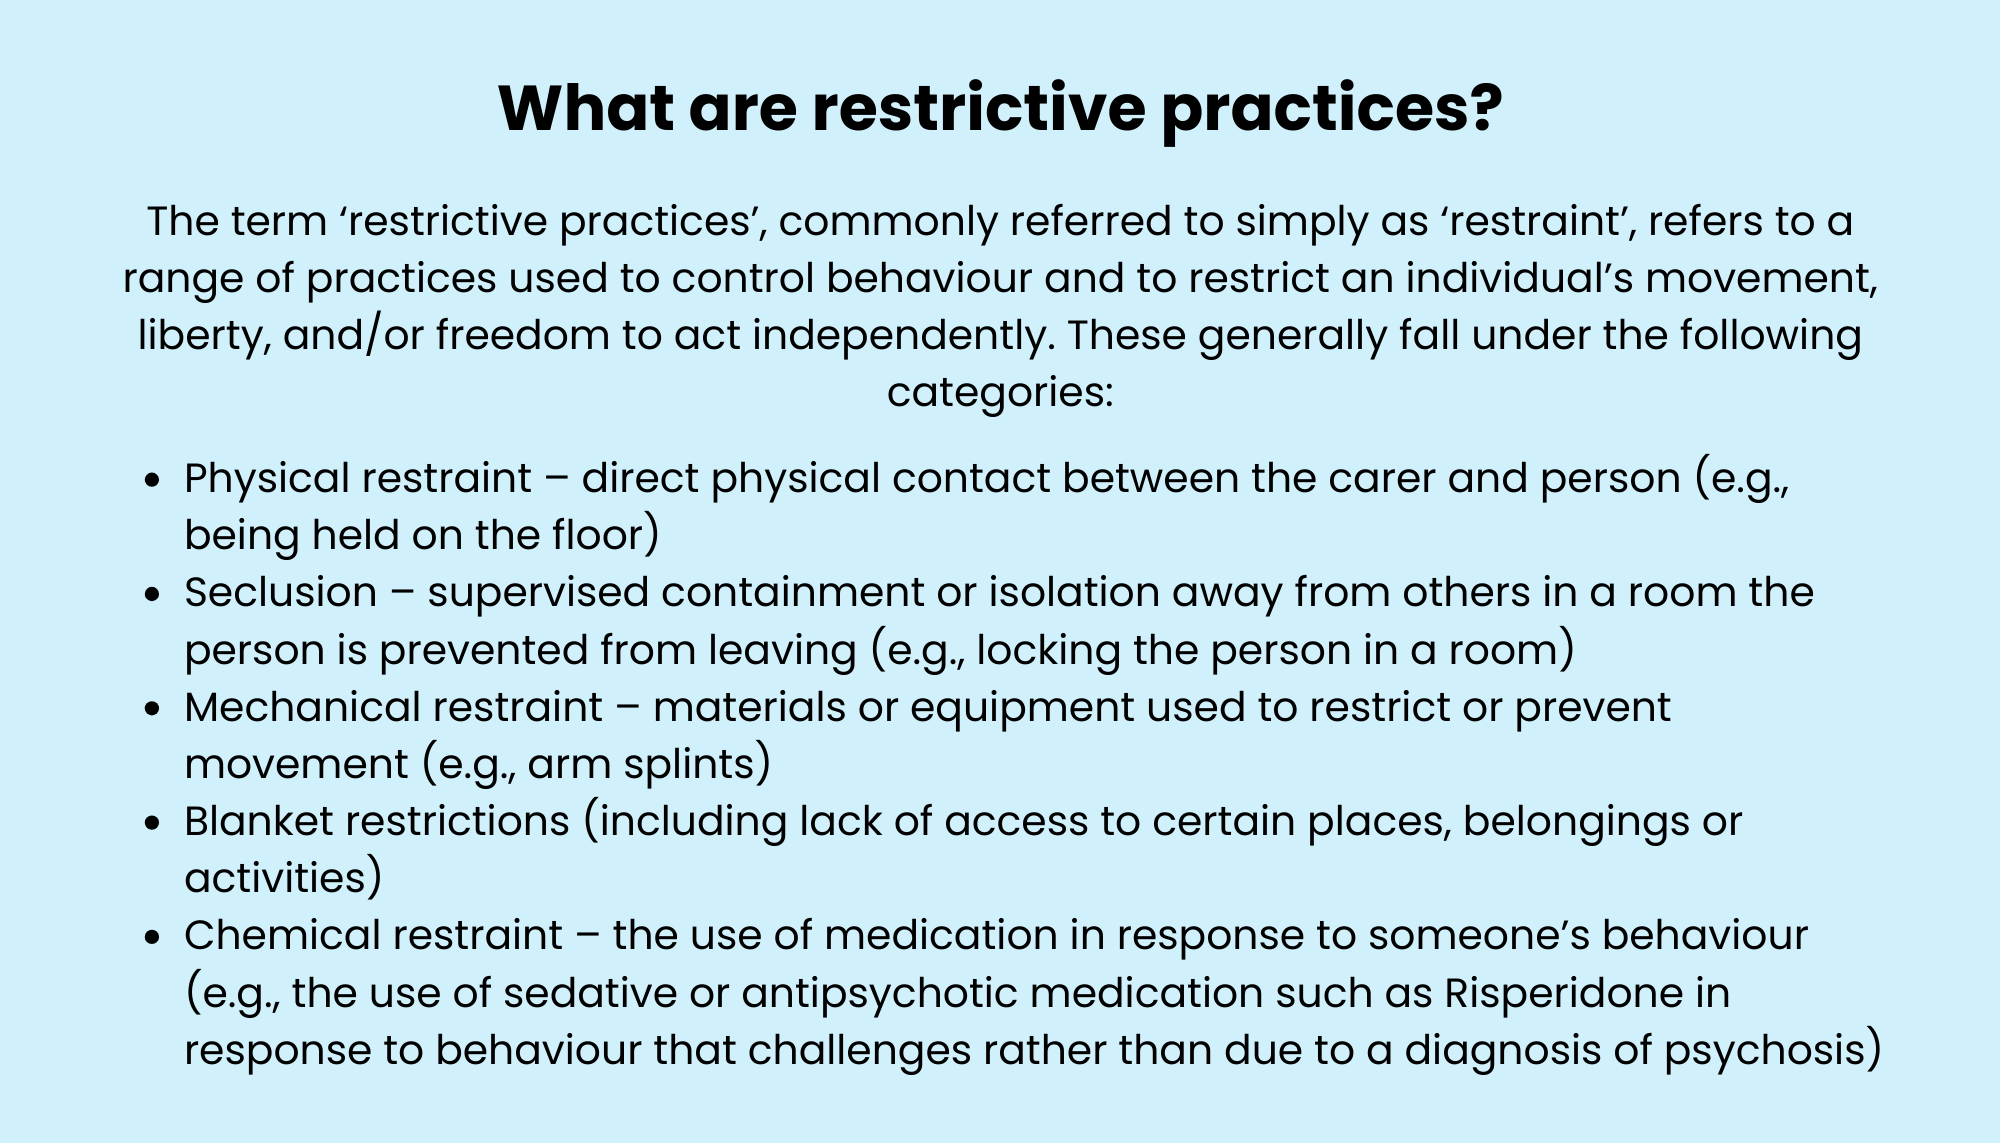 What are restrictive practices? The term ‘restrictive practices’, commonly referred to simply as ‘restraint’, refers to a range of practices used to control behaviour and to restrict an individual’s movement, liberty, and/or freedom to act independently. These generally fall under the following categories: Physical restraint – direct physical contact between the carer and person (e.g., being held on the floor) Seclusion – supervised containment or isolation away from others in a room the person is prevented from leaving (e.g., locking the person in a room) Mechanical restraint – materials or equipment used to restrict or prevent movement (e.g., arm splints) Blanket restrictions (including lack of access to certain places, belongings or activities) Chemical restraint – the use of medication in response to someone’s behaviour (e.g., the use of sedative or antipsychotic medication such as Risperidone in response to behaviour that challenges rather than due to a diagnosis of psychosis)